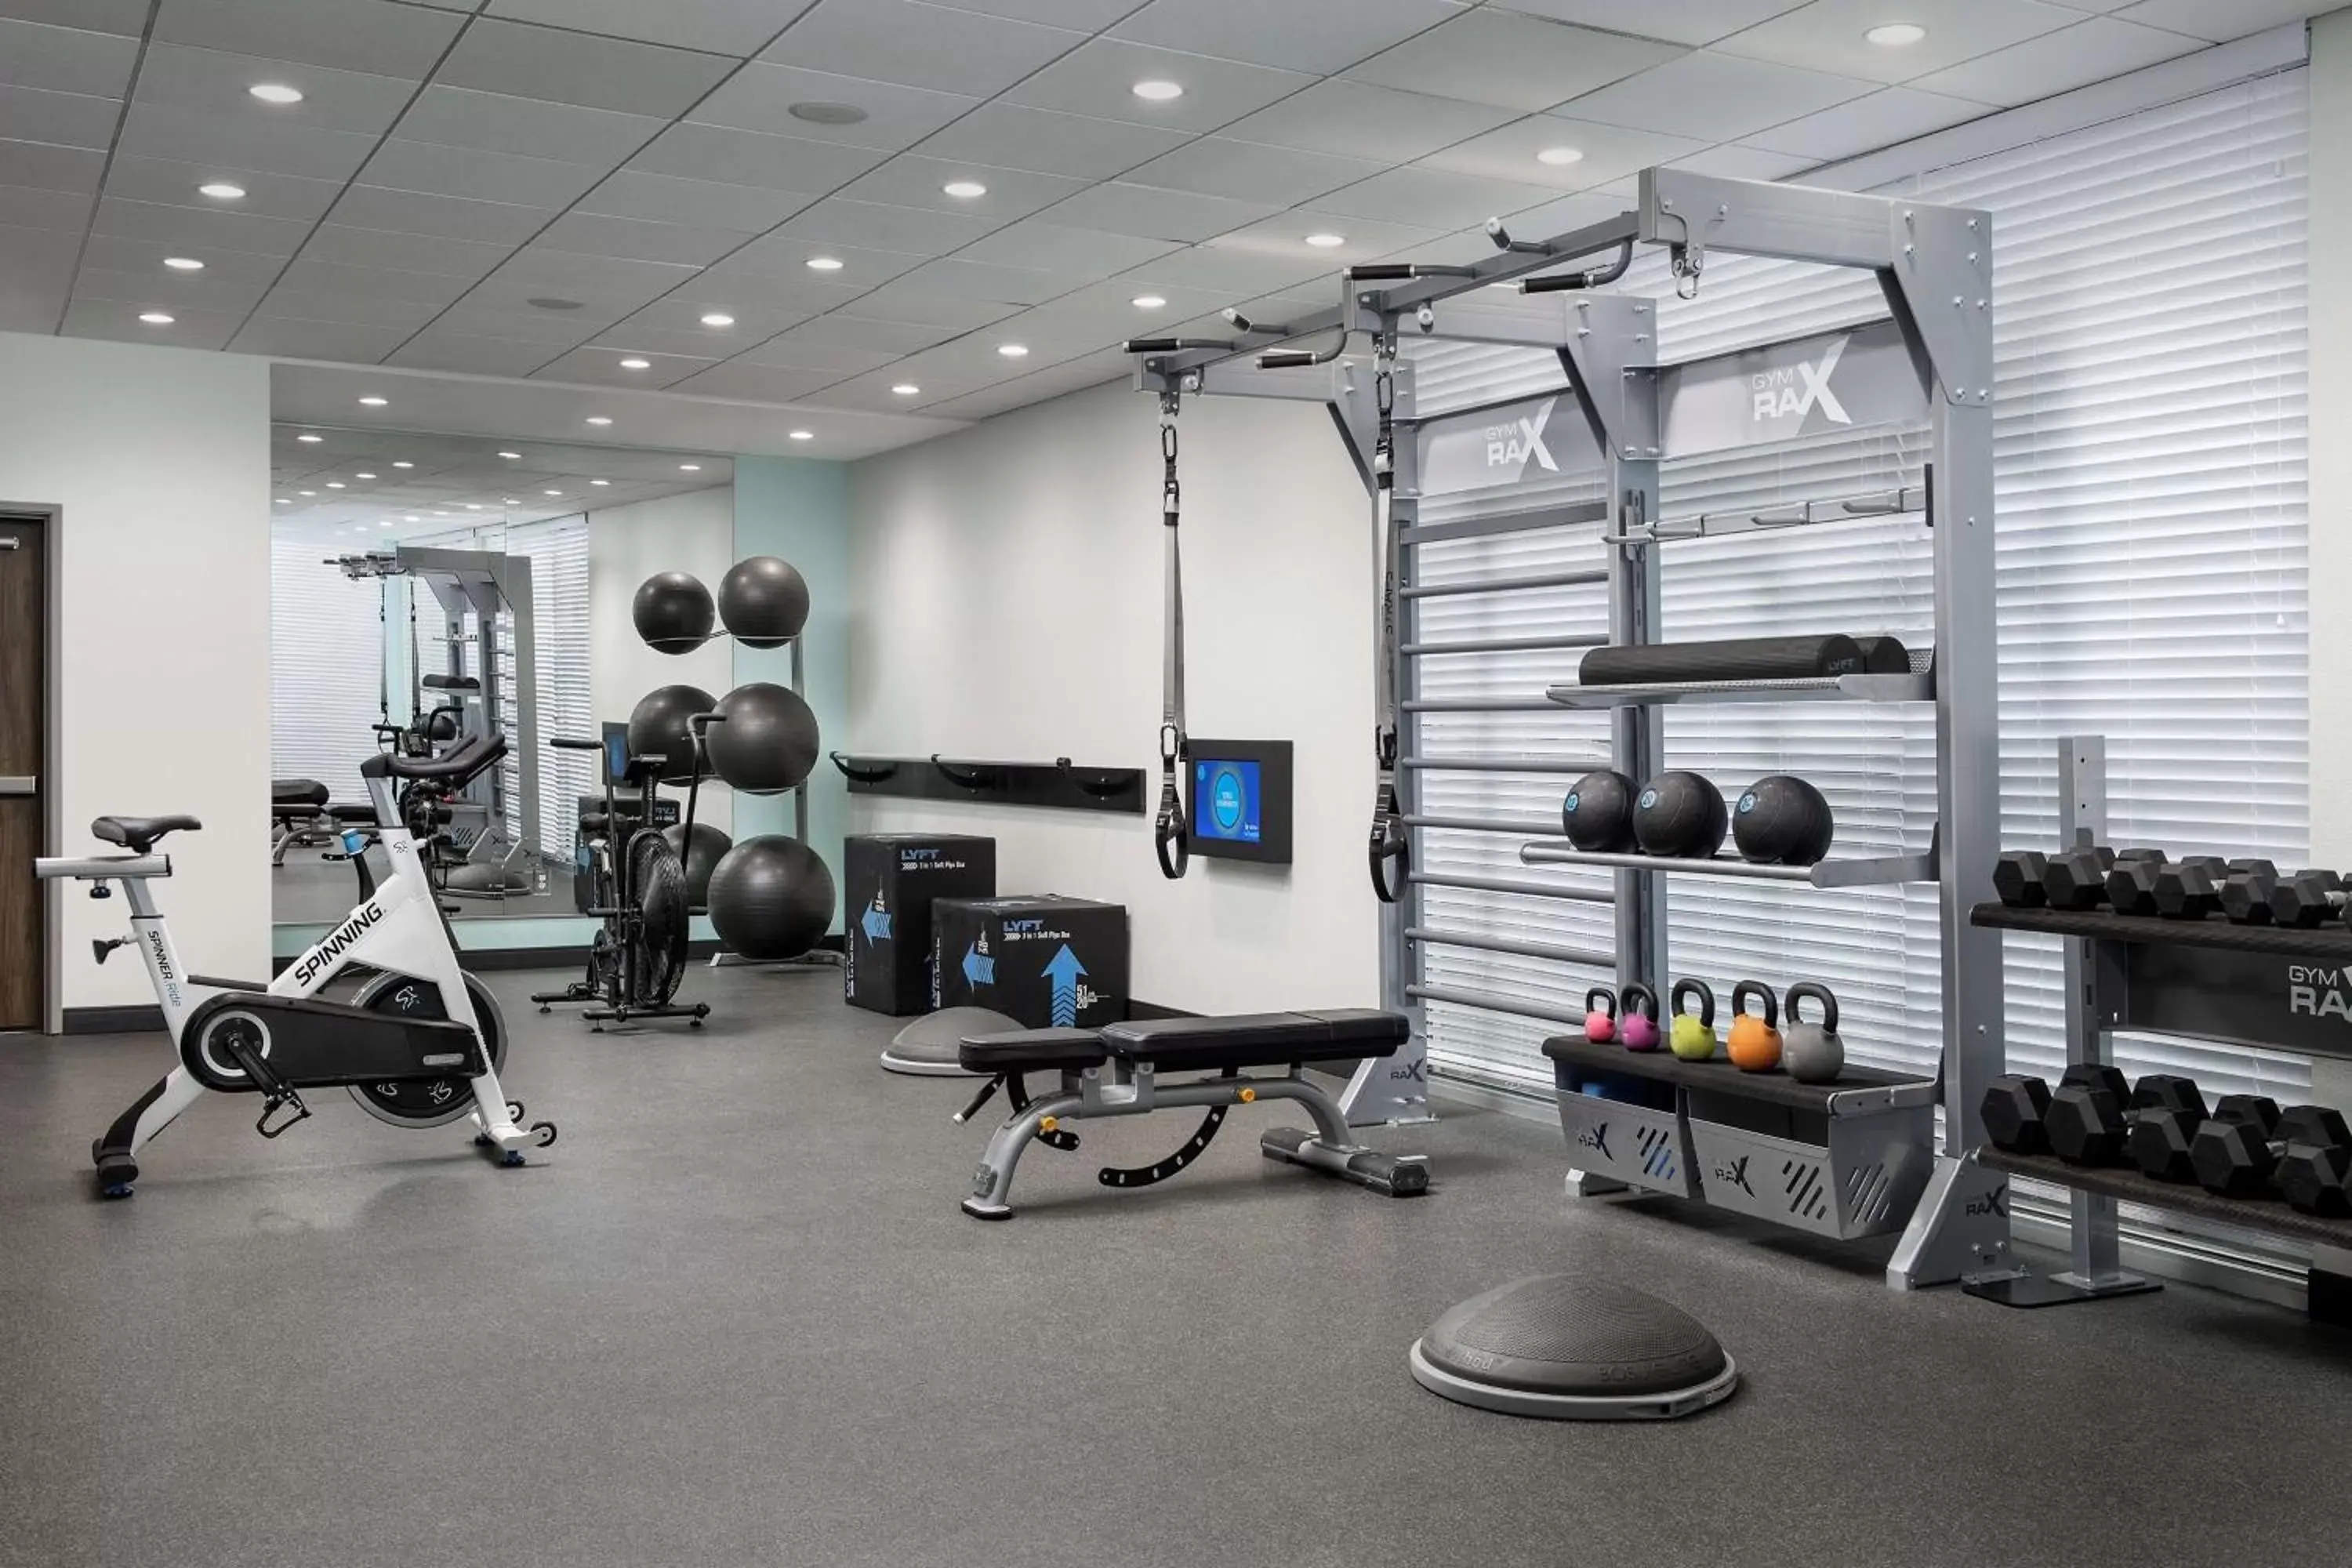 Fitness centre/facilities, Fitness Center/Facilities in Tru By Hilton Rapid City Rushmore, Sd